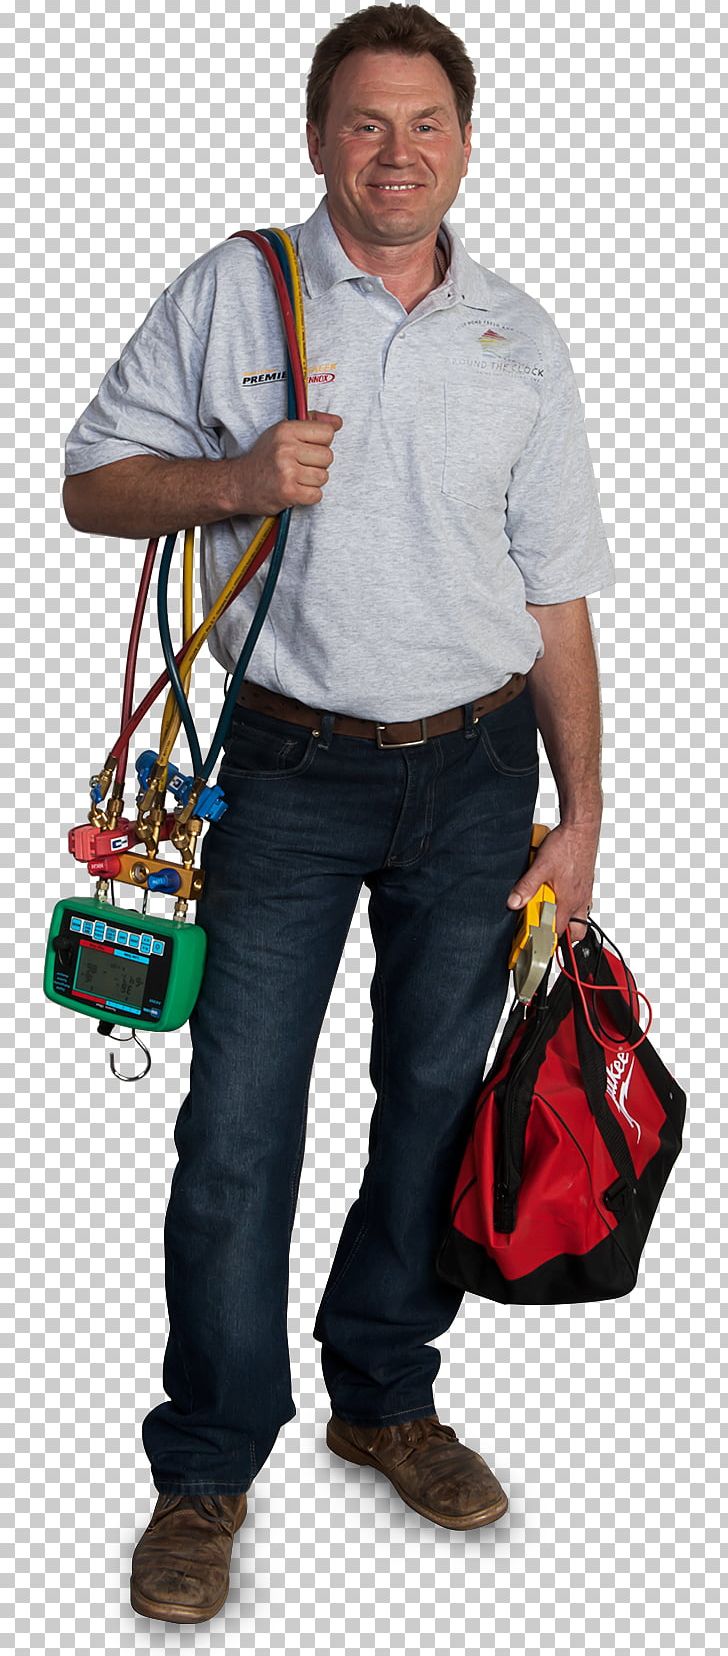 HVAC Furnace Air Conditioning Technician Air Conditioner PNG, Clipart, Air, Air Conditioner, Air Conditioning, Bag, Central Heating Free PNG Download